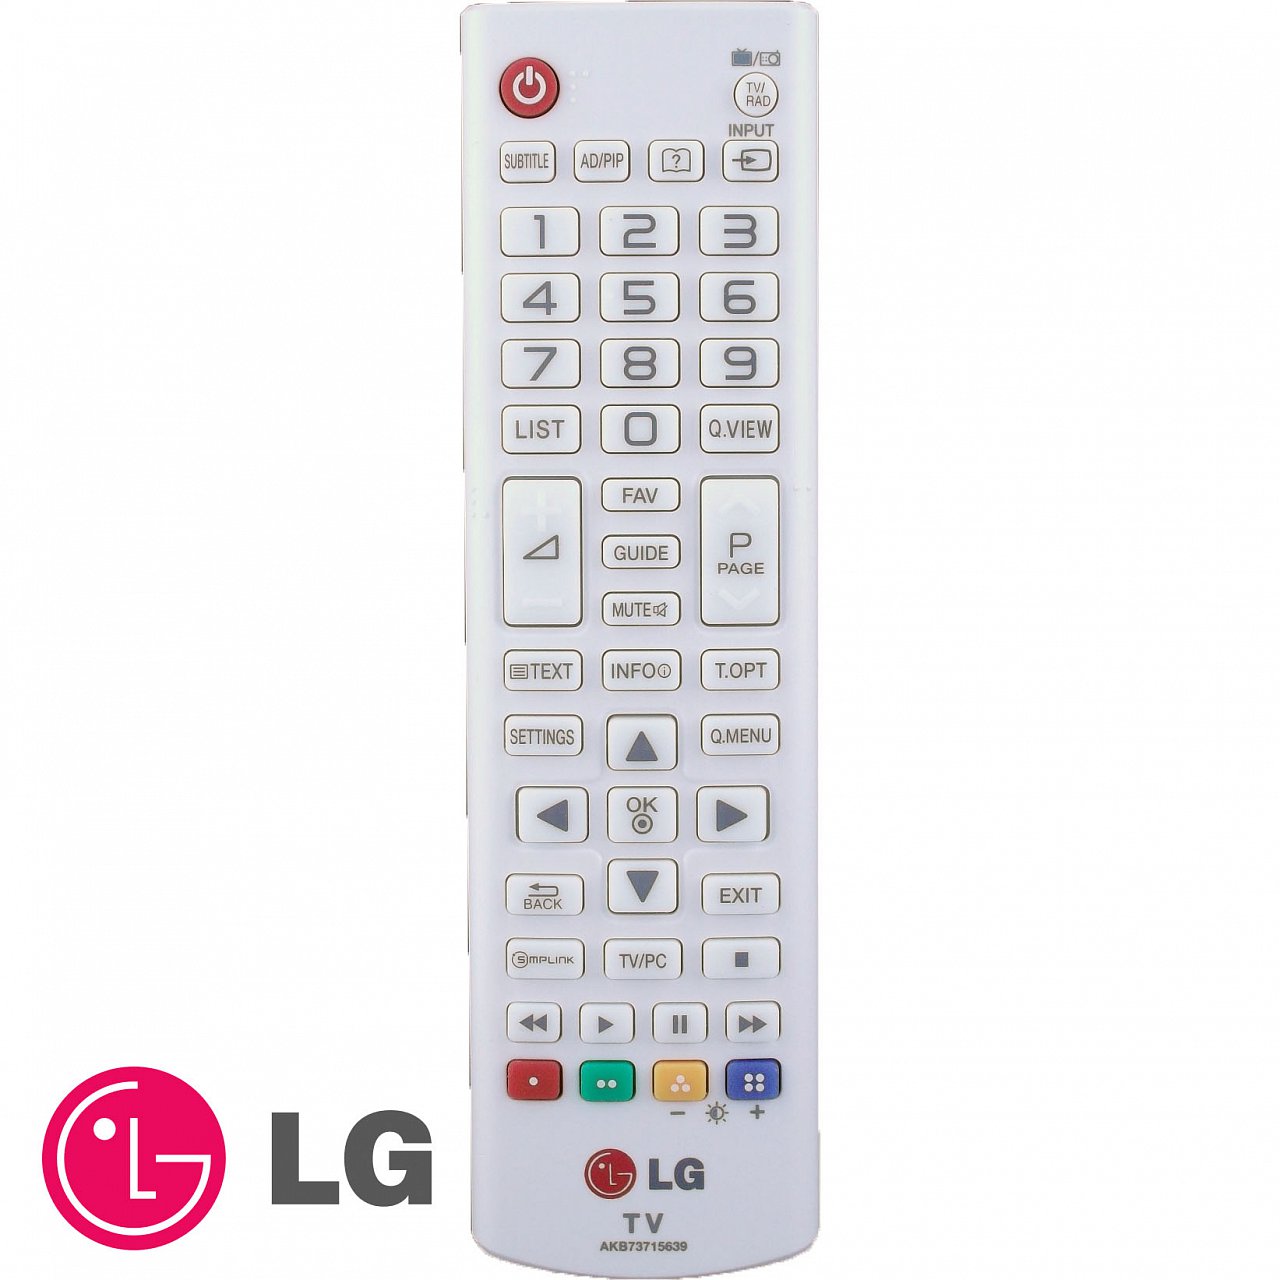 LG AKB73715639 replacement remote control  different look